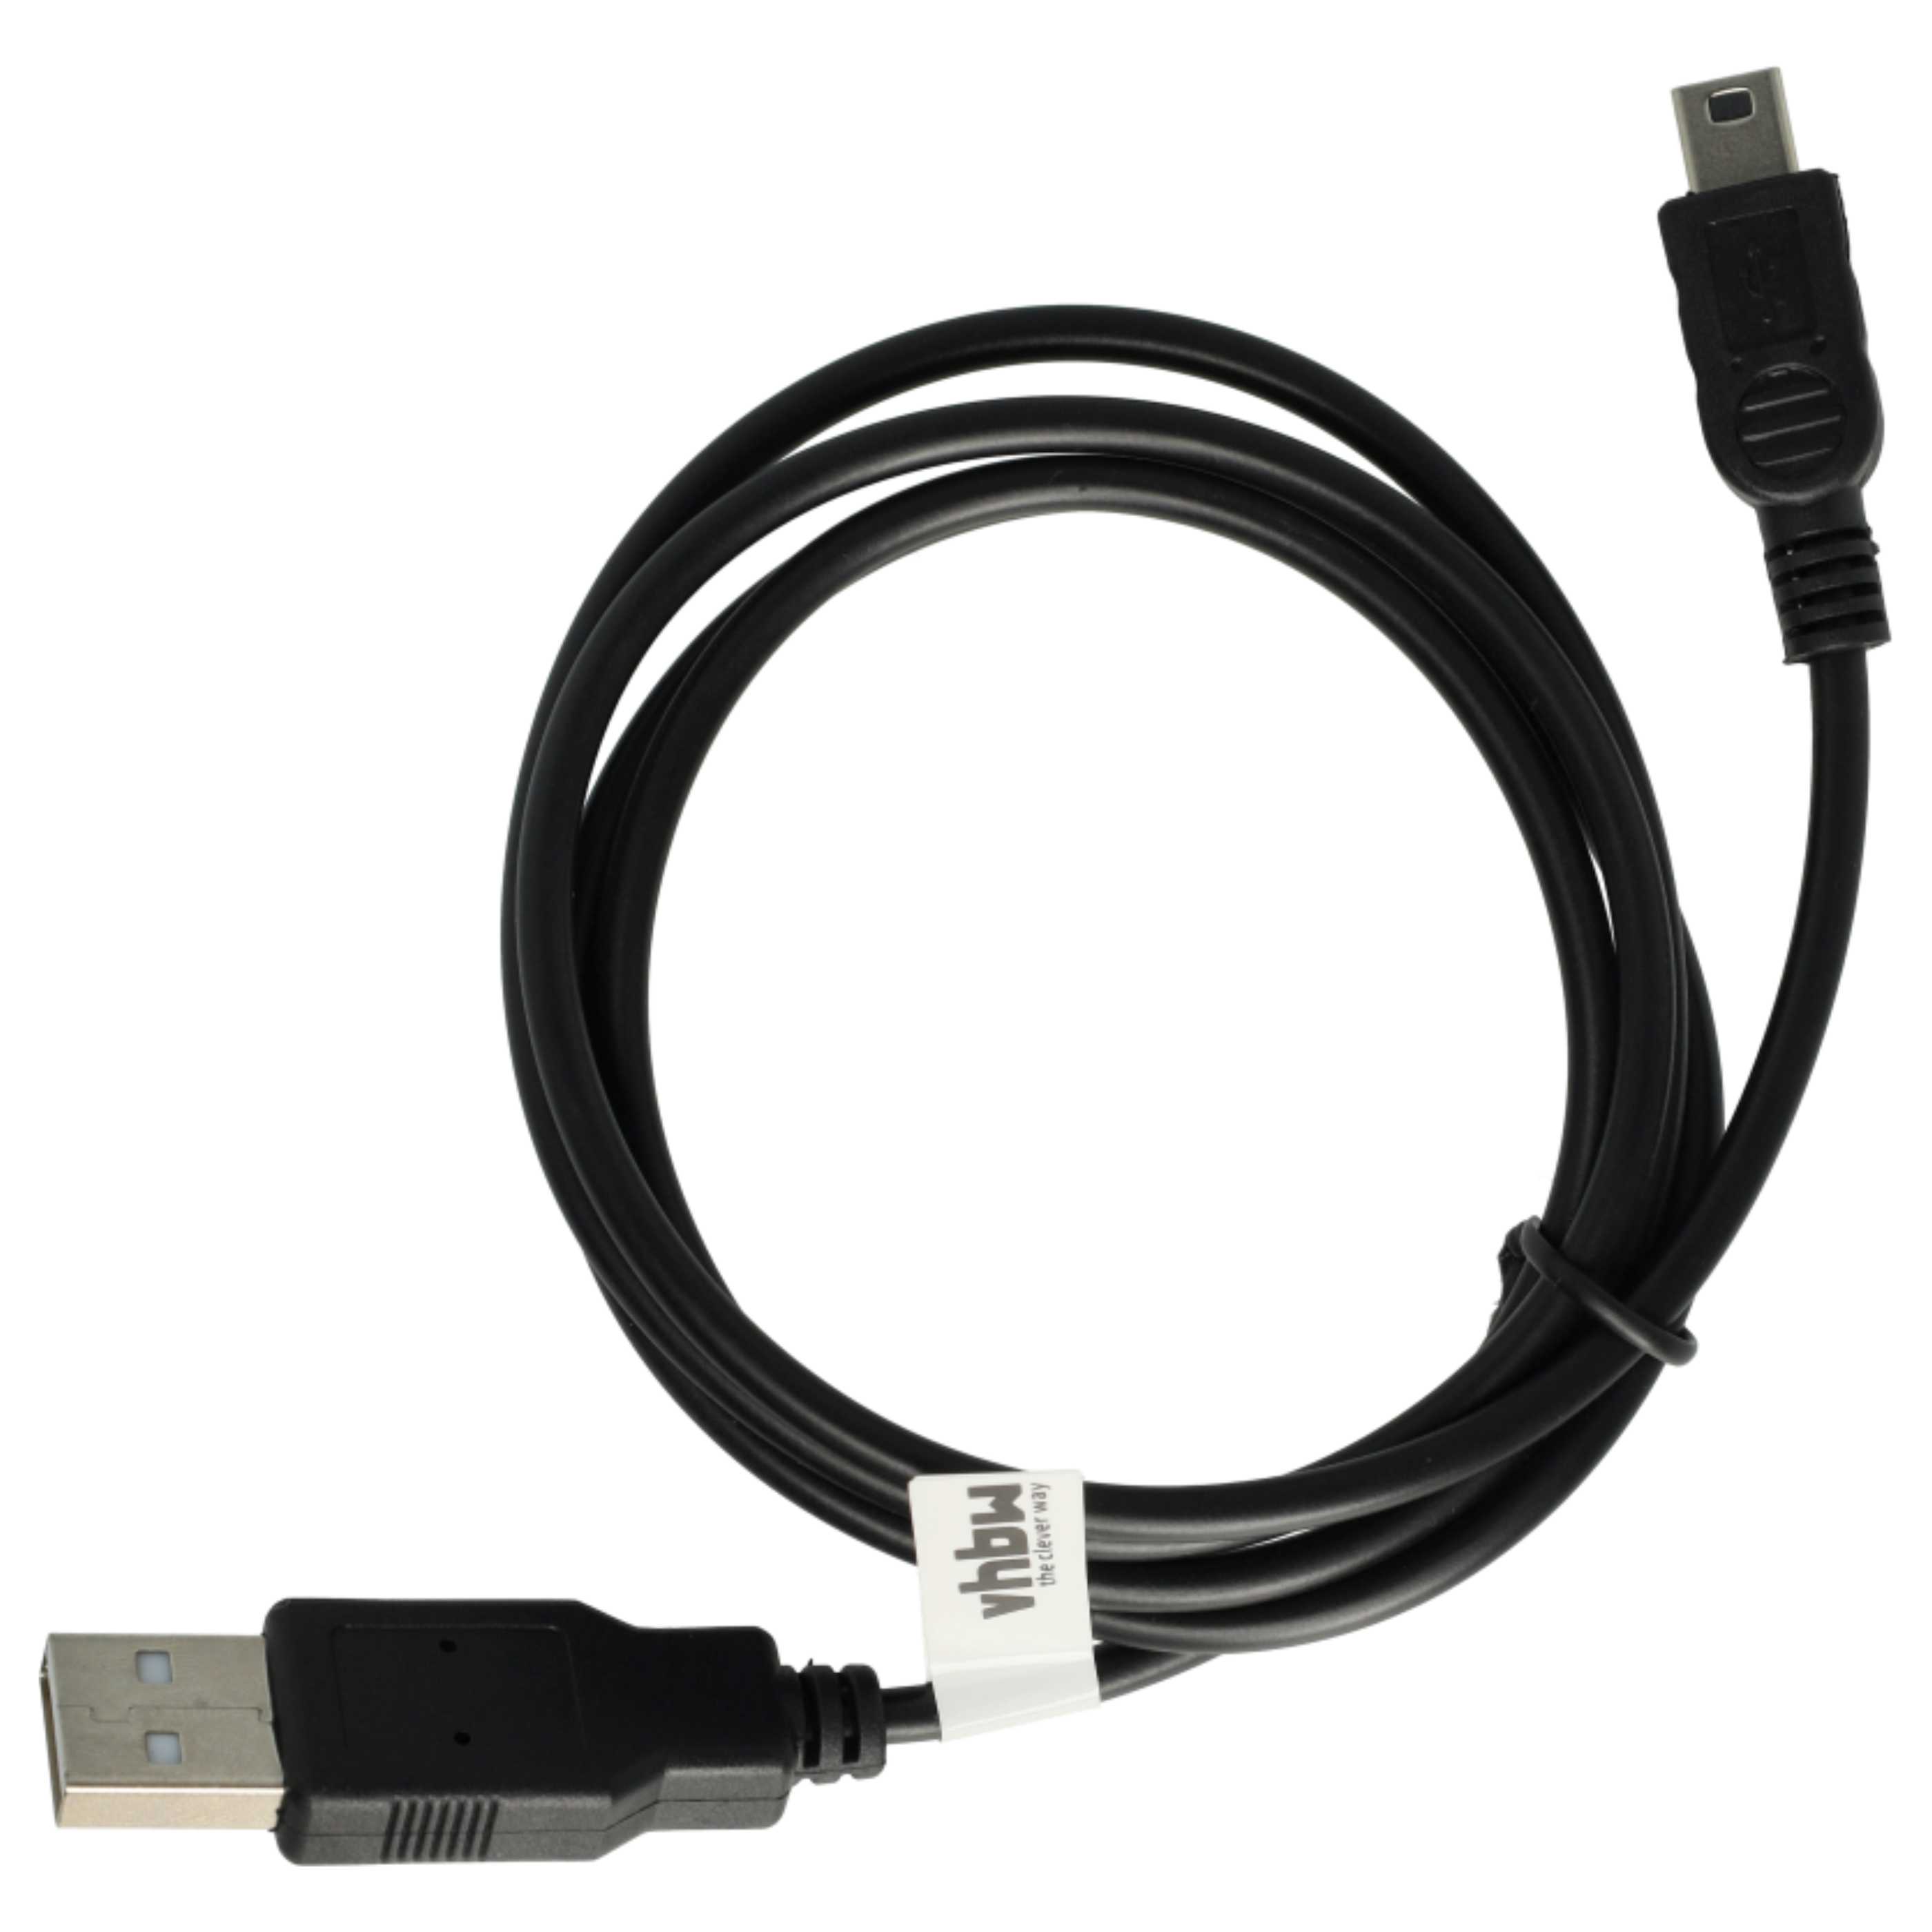 USB Data Cable 2in1 Charger e.g. for Mustek PVRH 140 GPS Sat-Nav Devices